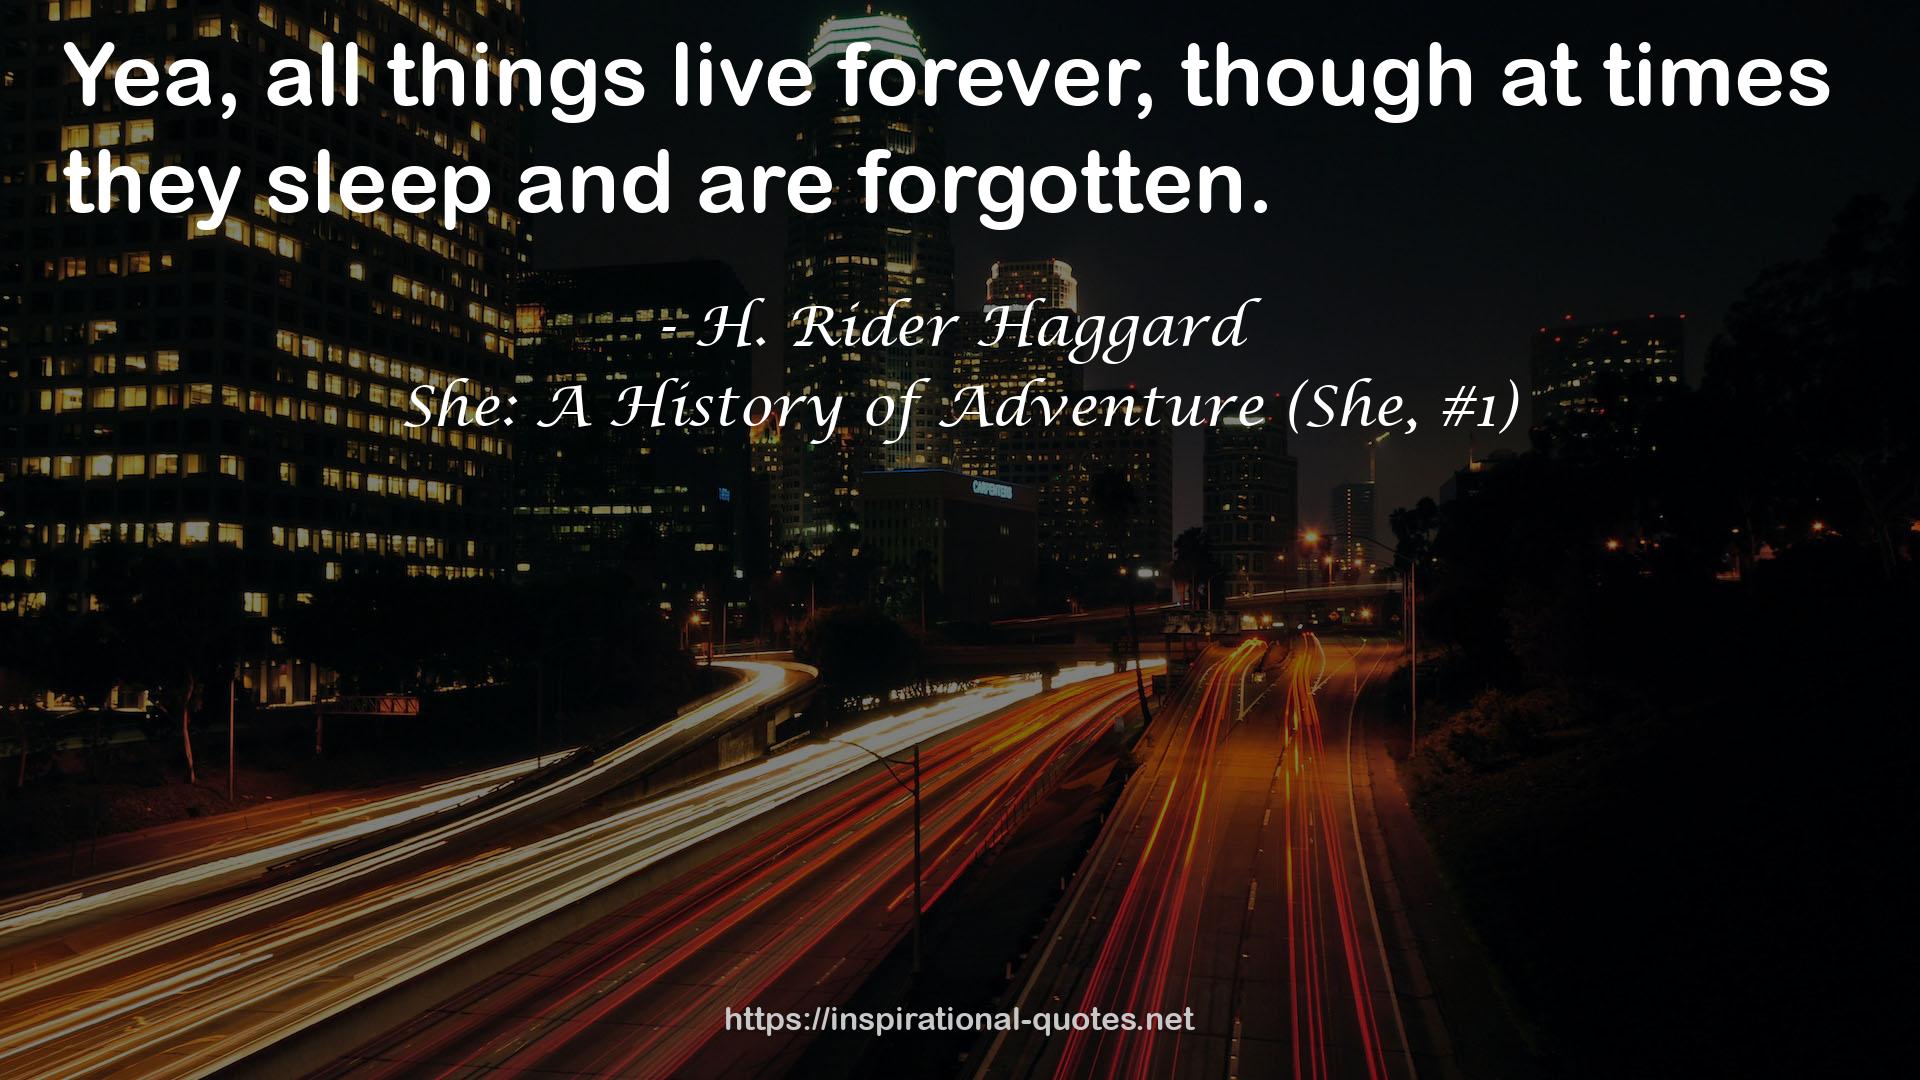 She: A History of Adventure (She, #1) QUOTES